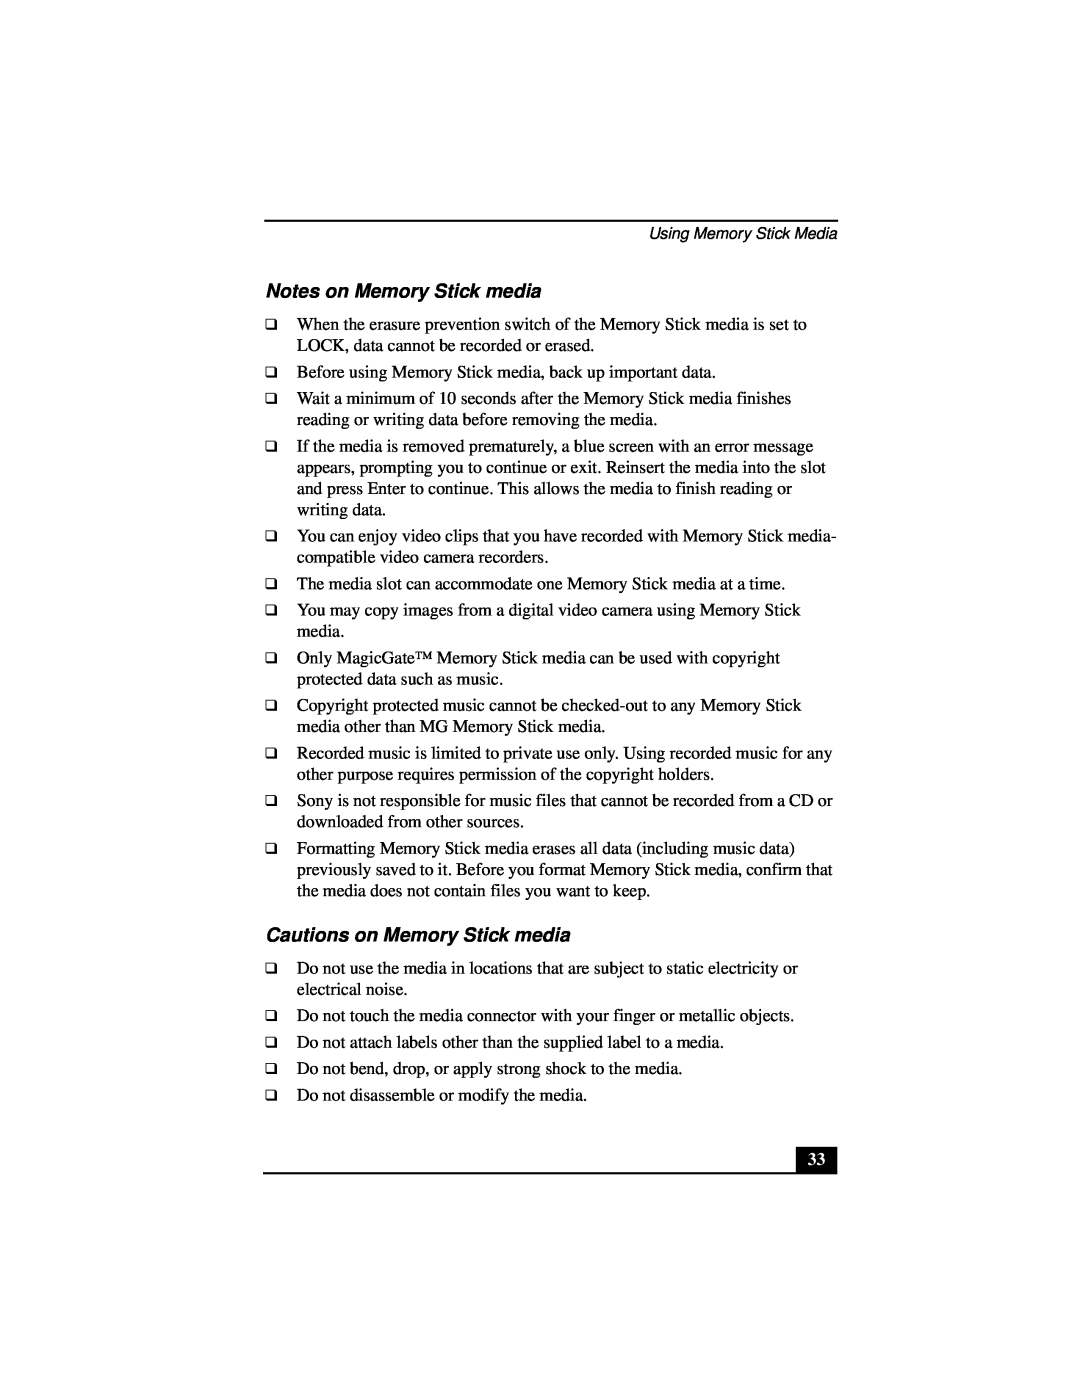 Sony Notebook Computer manual Notes on Memory Stick media, Cautions on Memory Stick media 